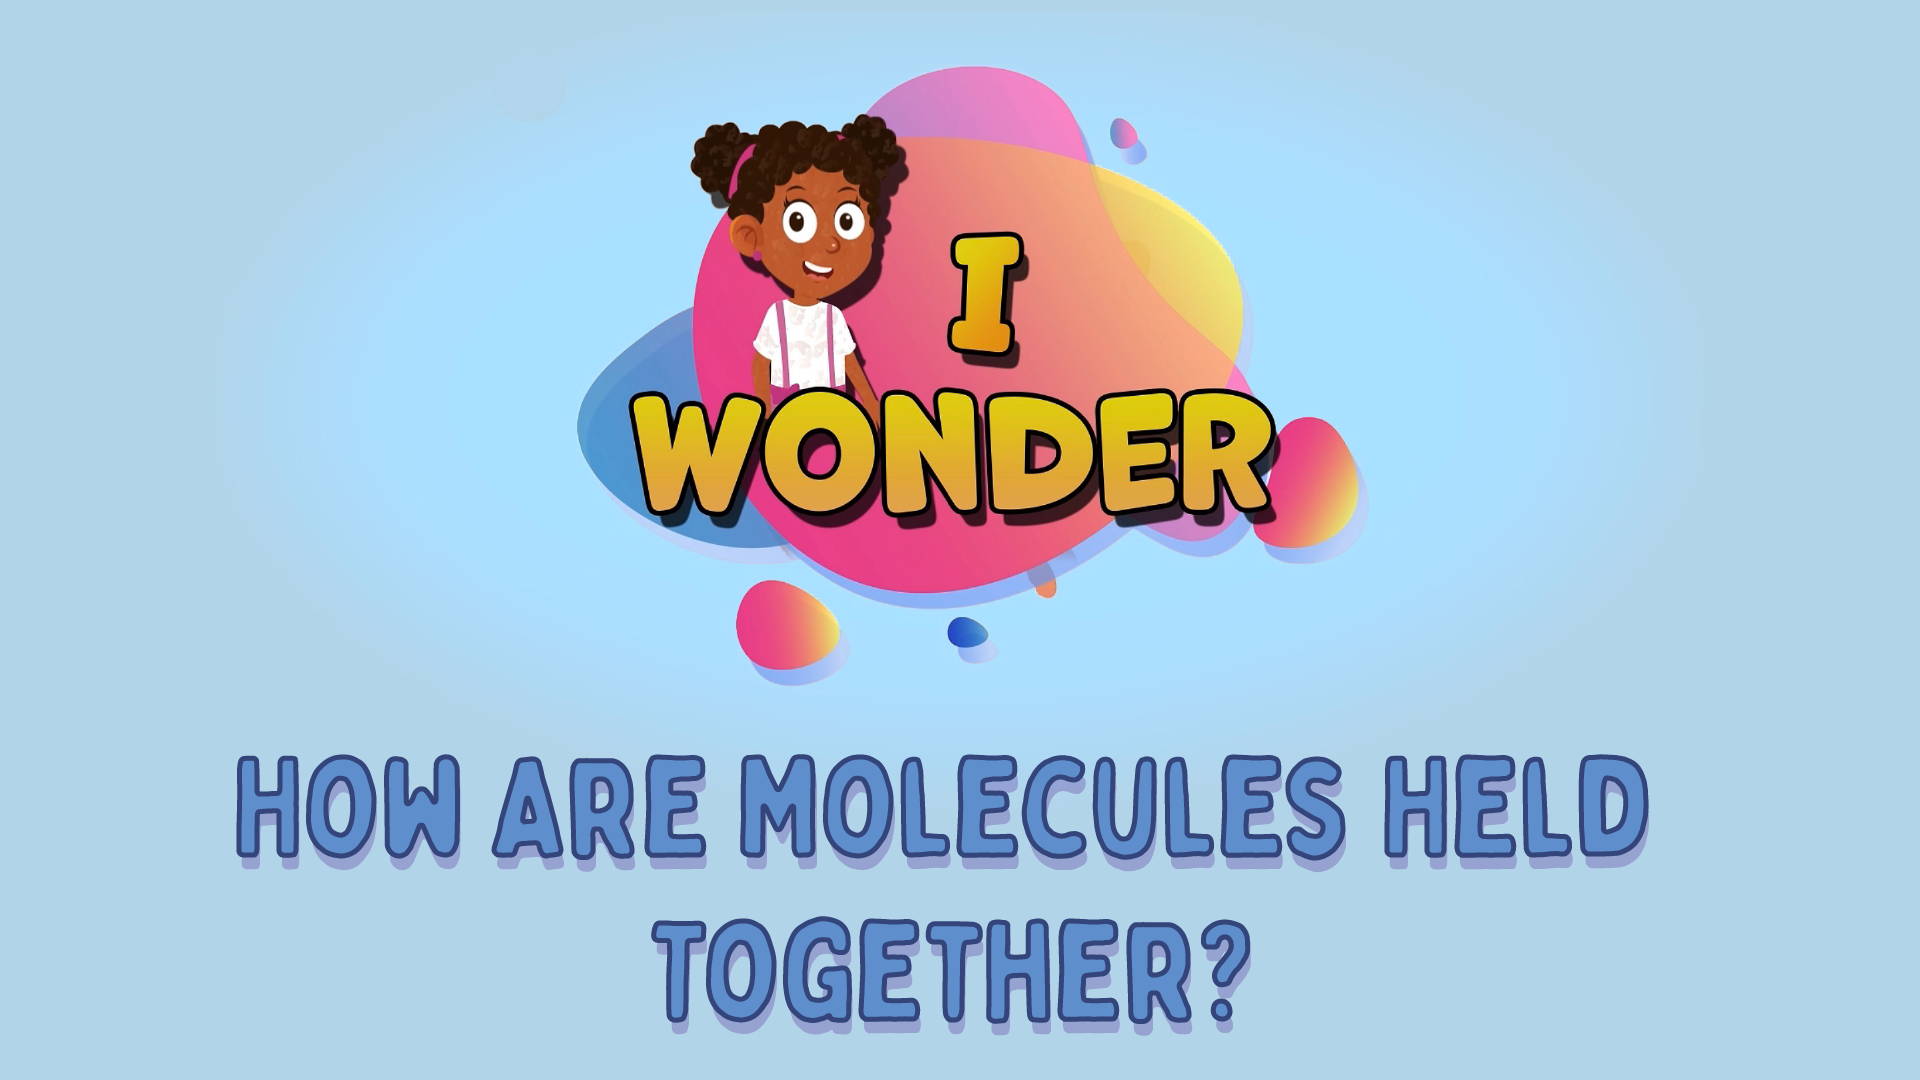 How Are Molecules Held Together?